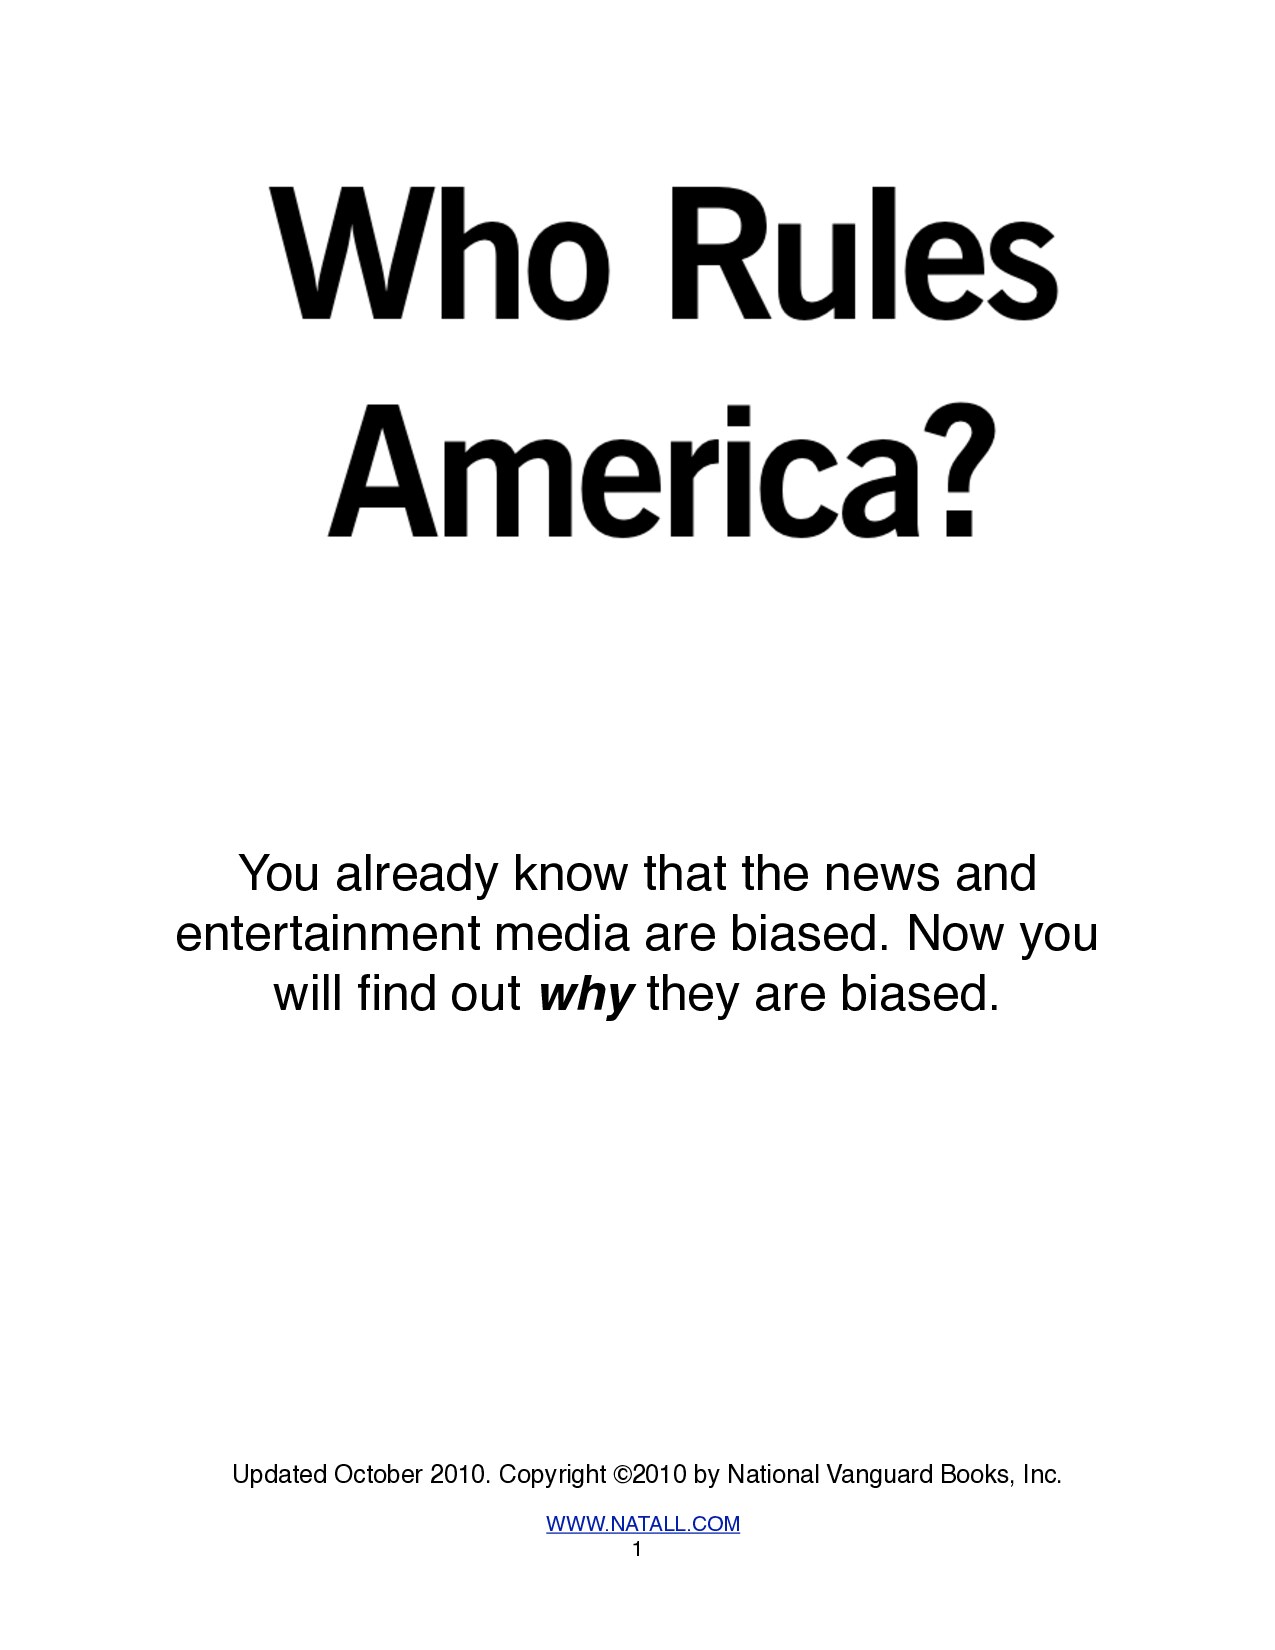 Who Rules America (2010 version)